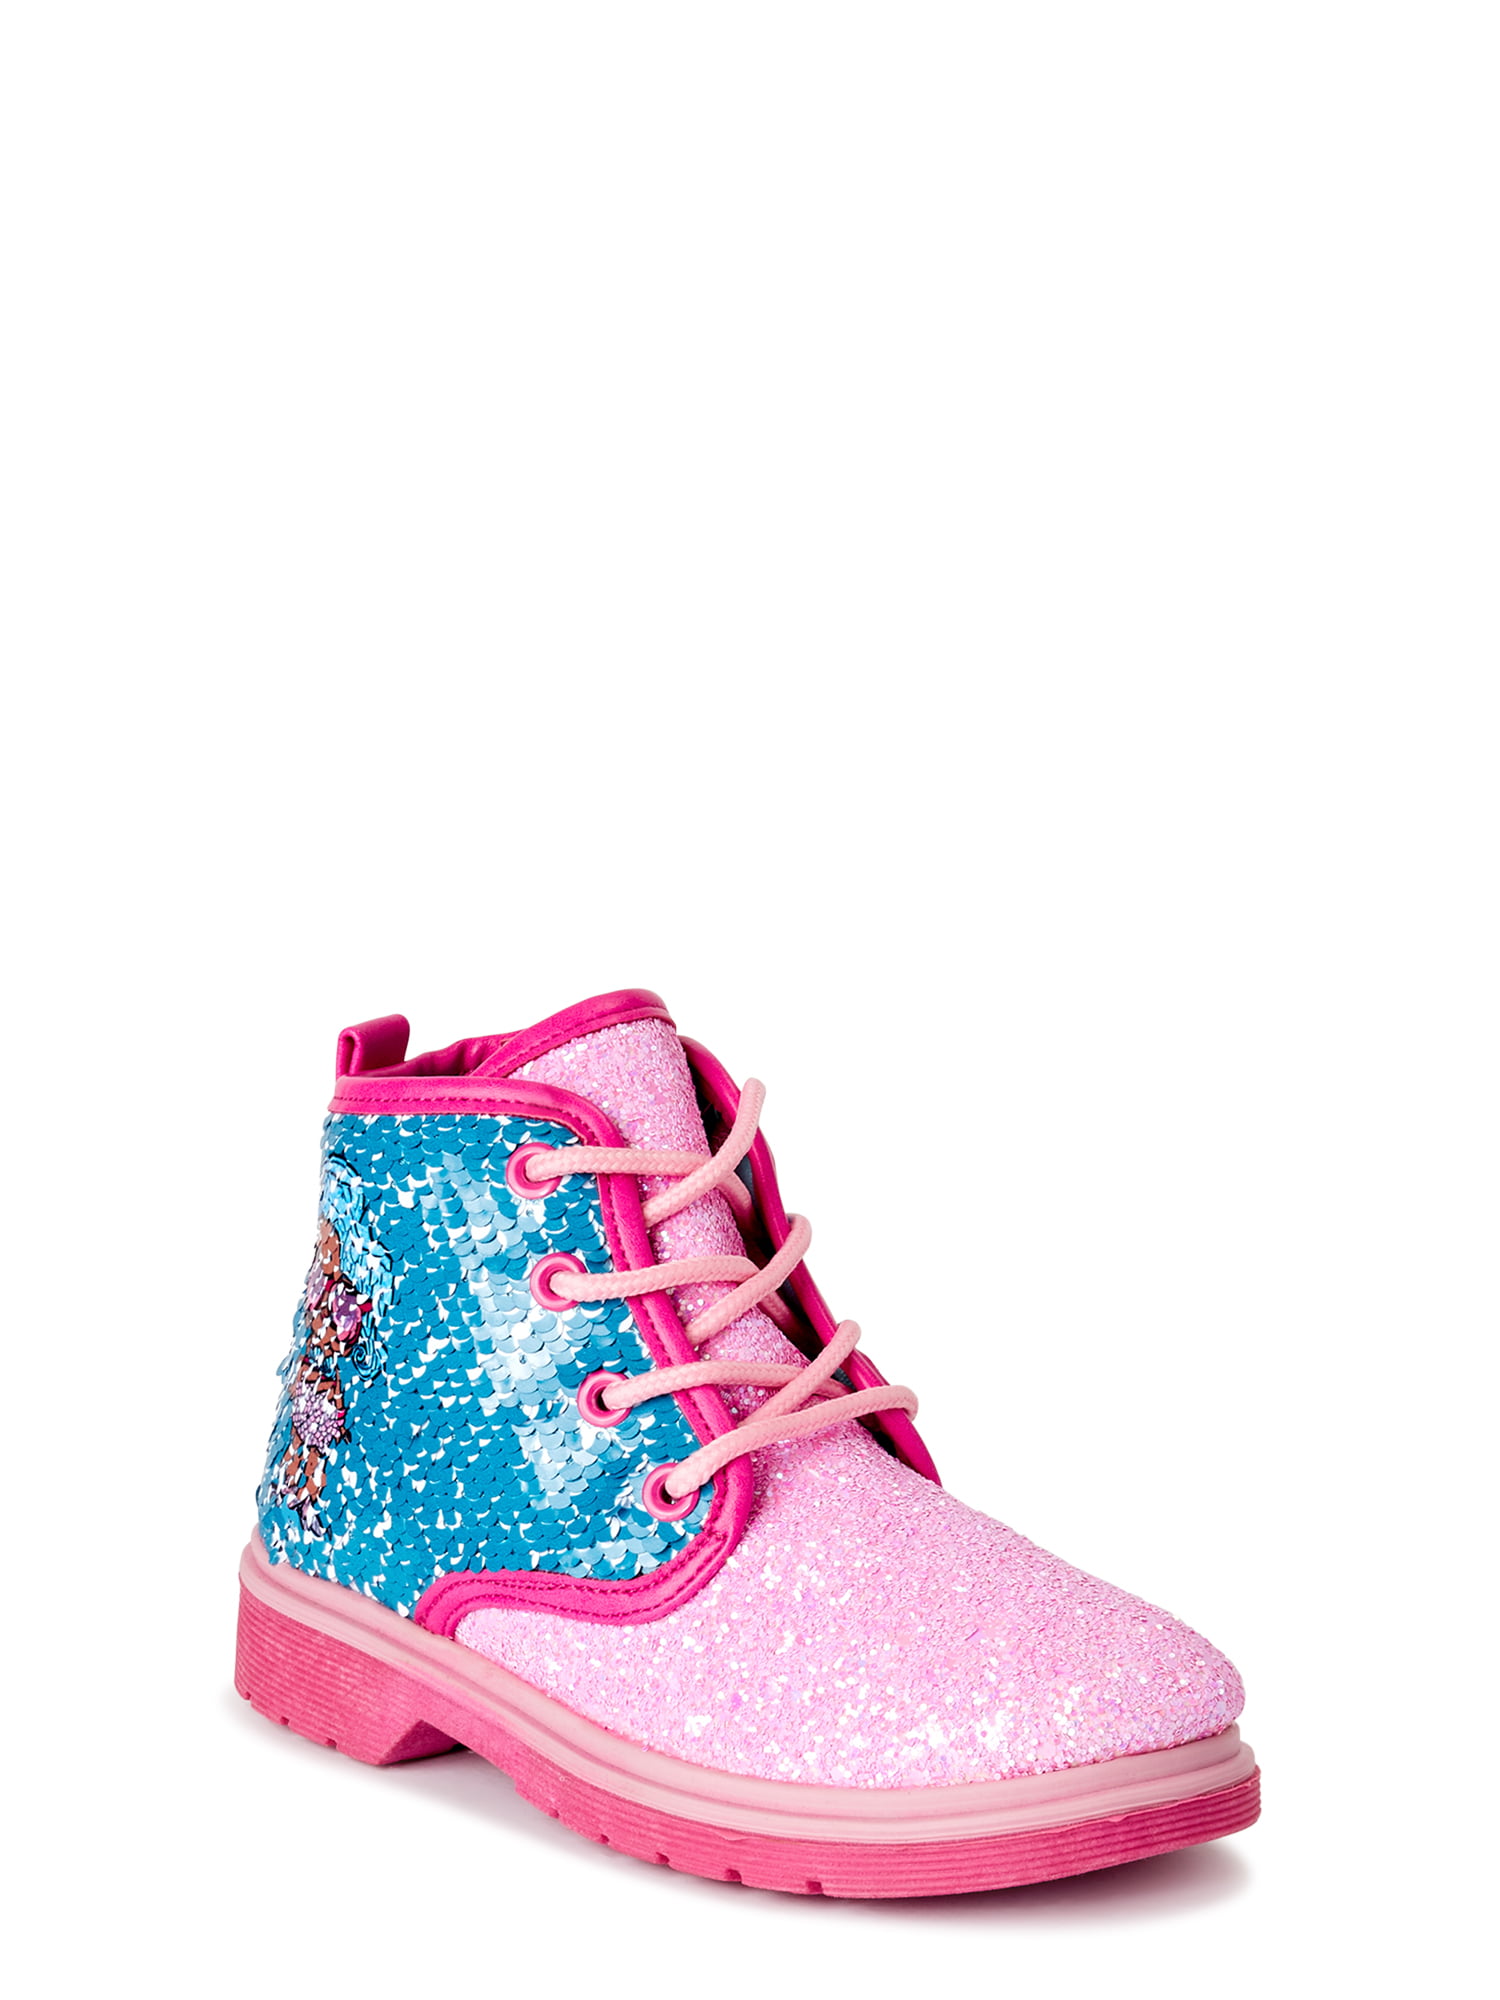 girls holiday shoes